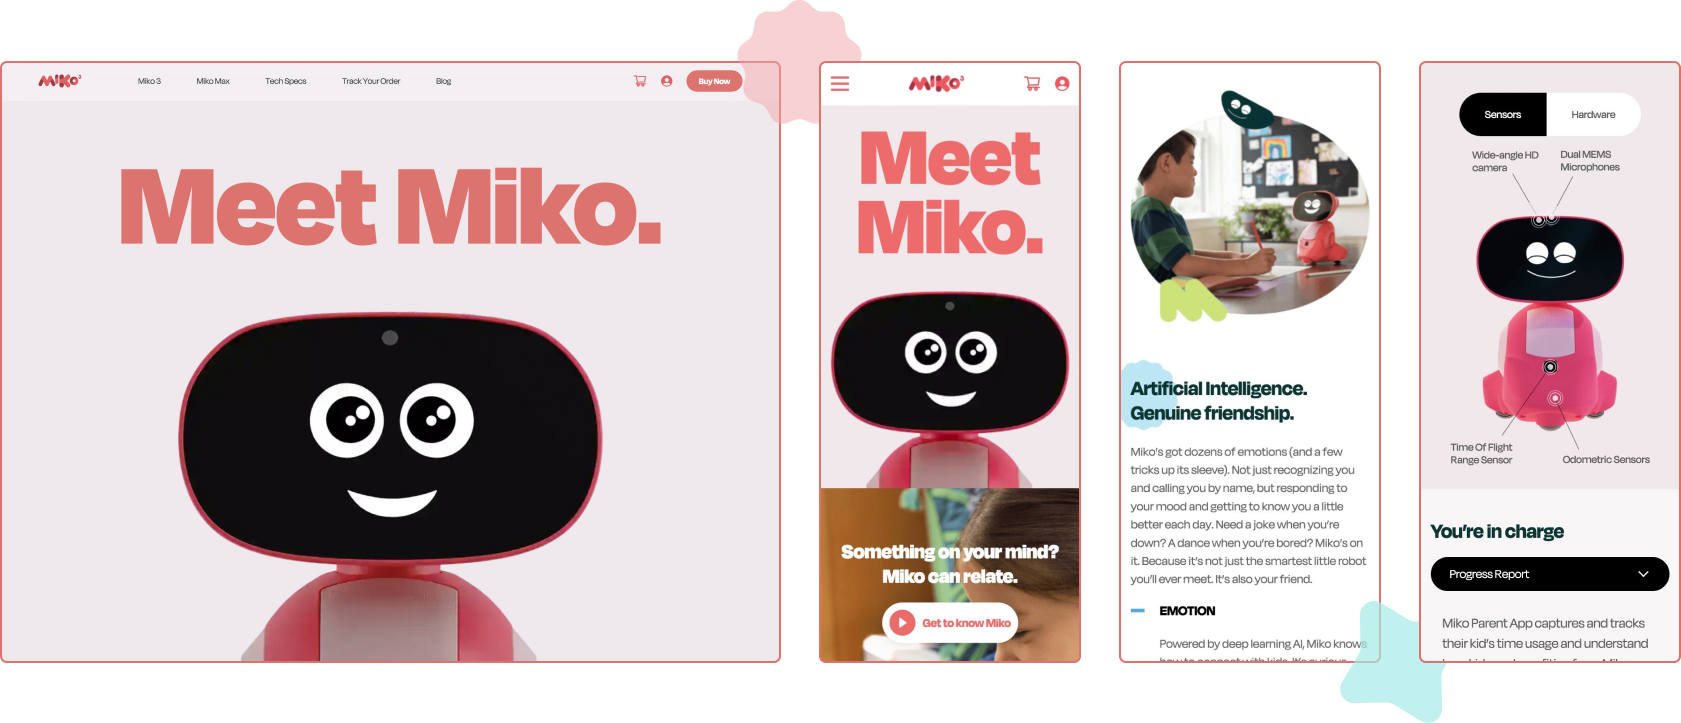 From Labs to Household - Commerce Journey of Miko